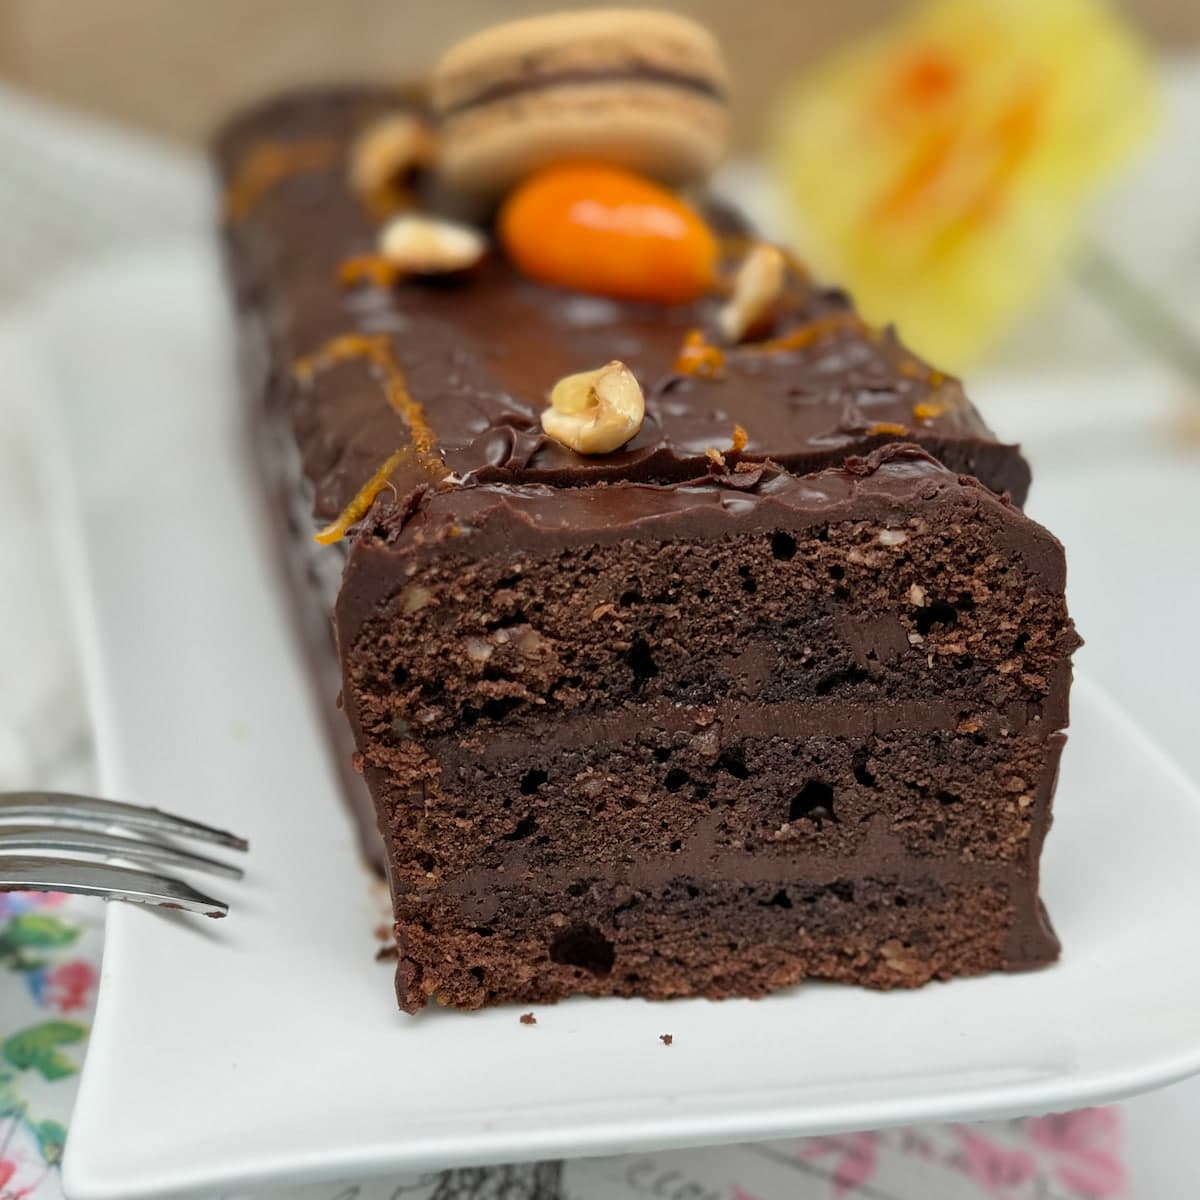 French layered chocolate cake, showing the moist inside layers